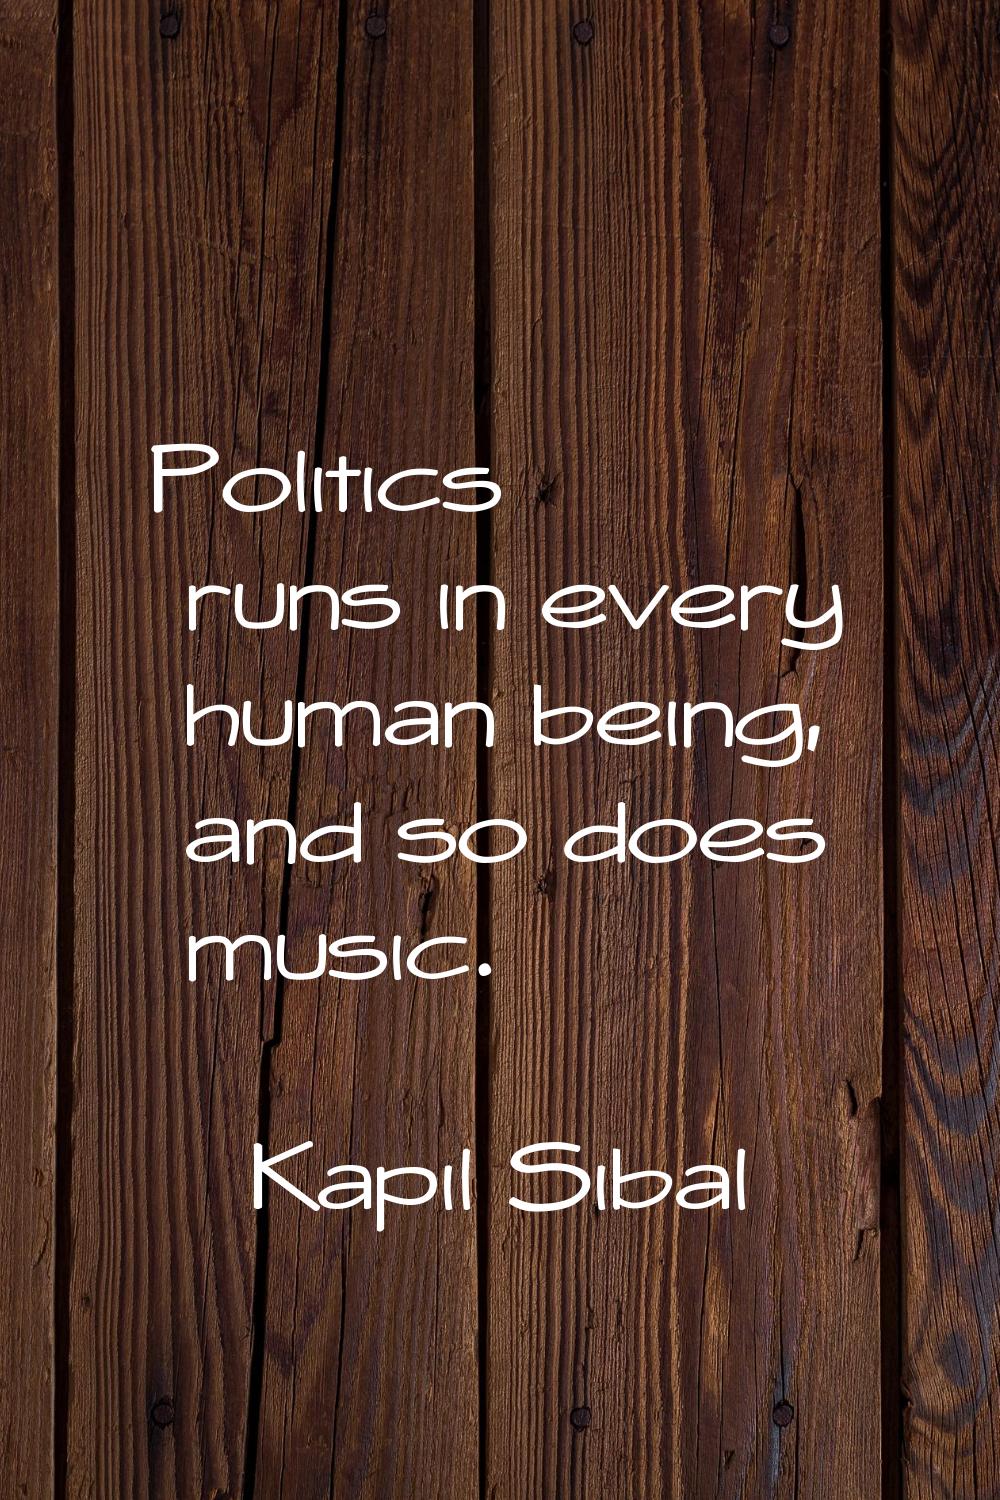 Politics runs in every human being, and so does music.